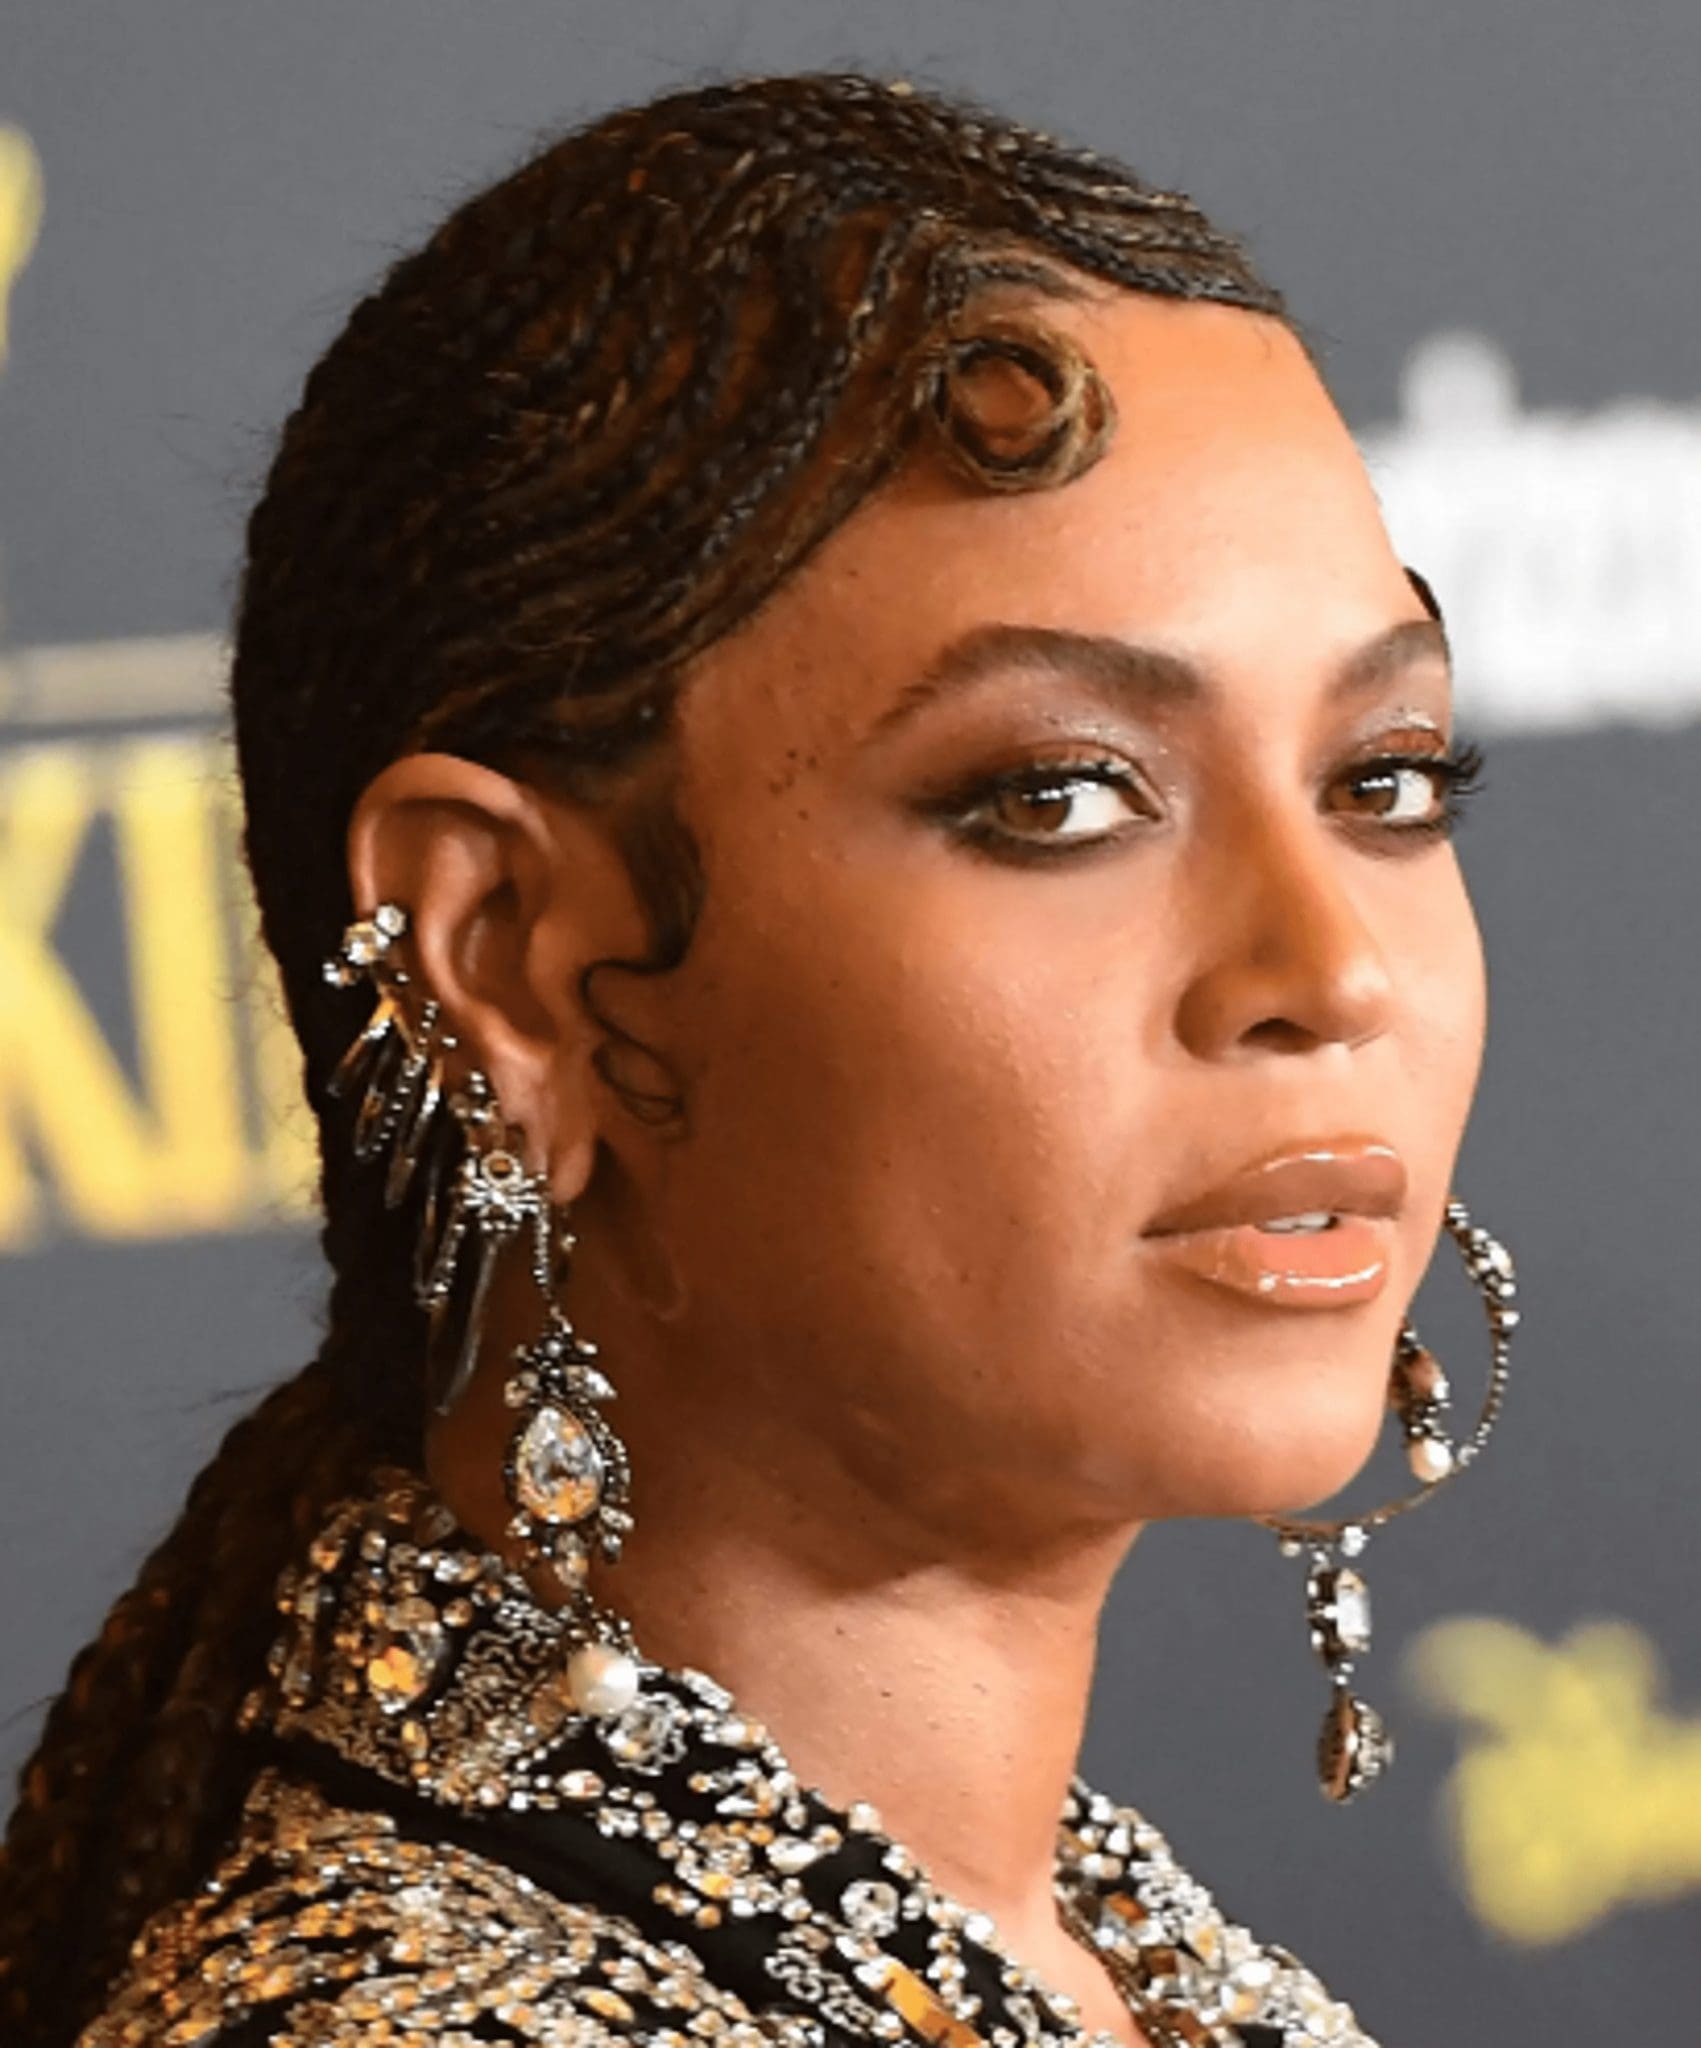 After Receiving Criticism For Using Ableist Language, Beyoncé Would Alter The Lyrics